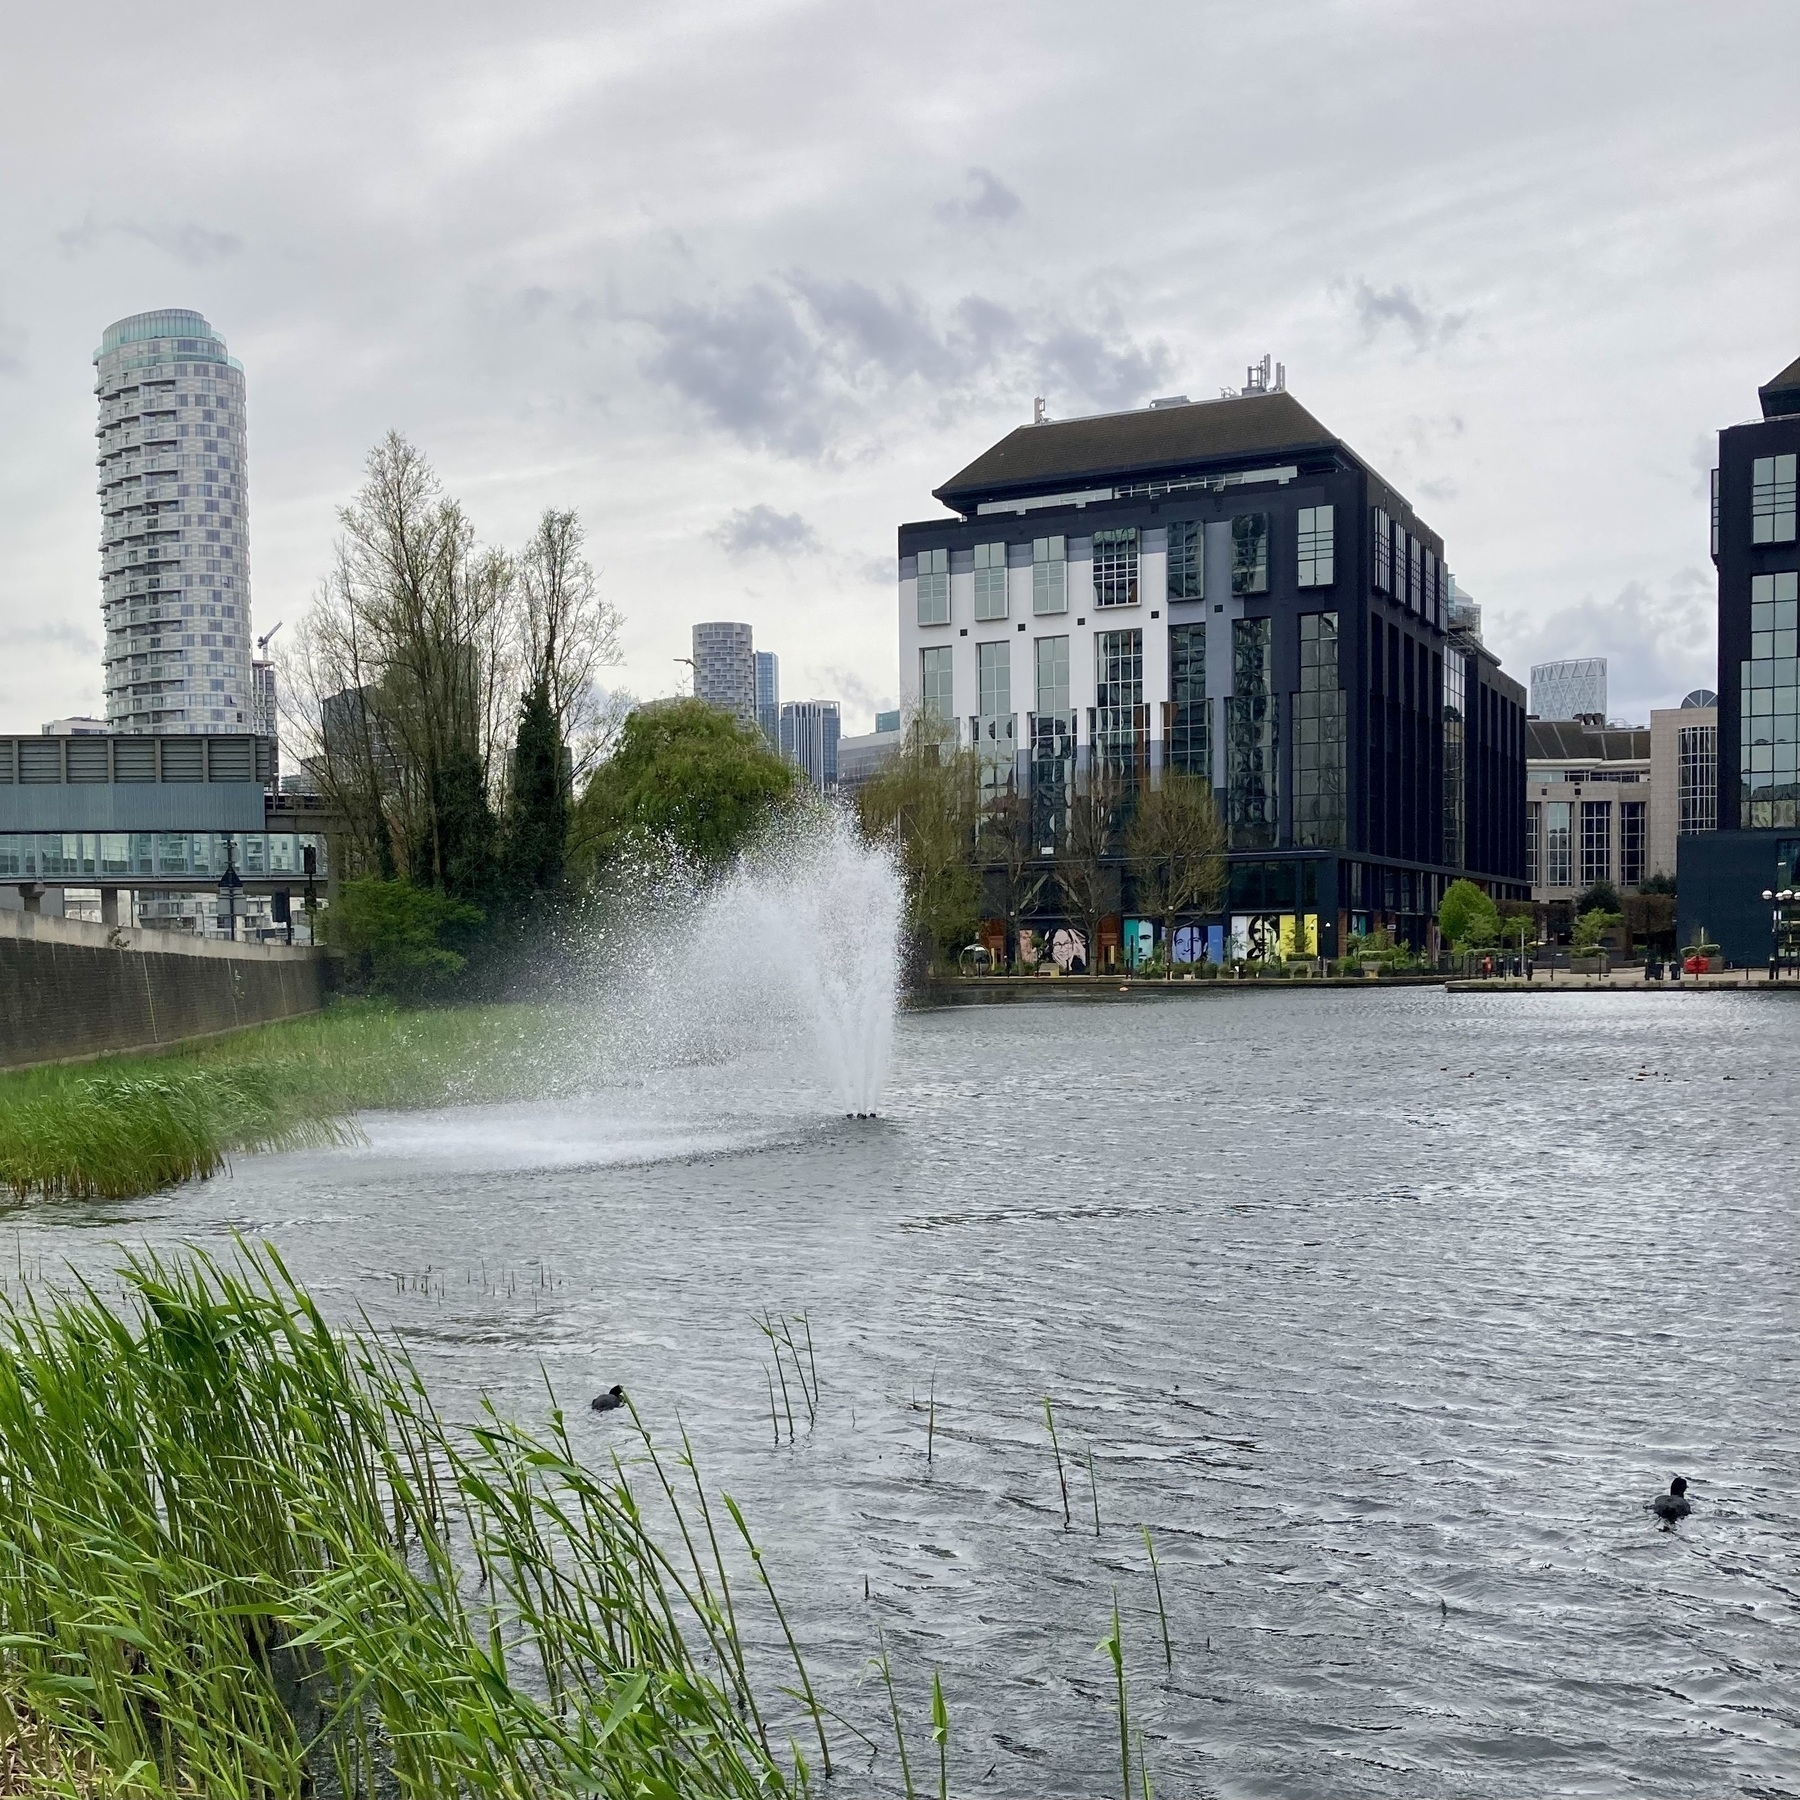 A pond in the city, windblown reeds and a fountain plume bent over by the wind. Two coots swim towards distant buildings